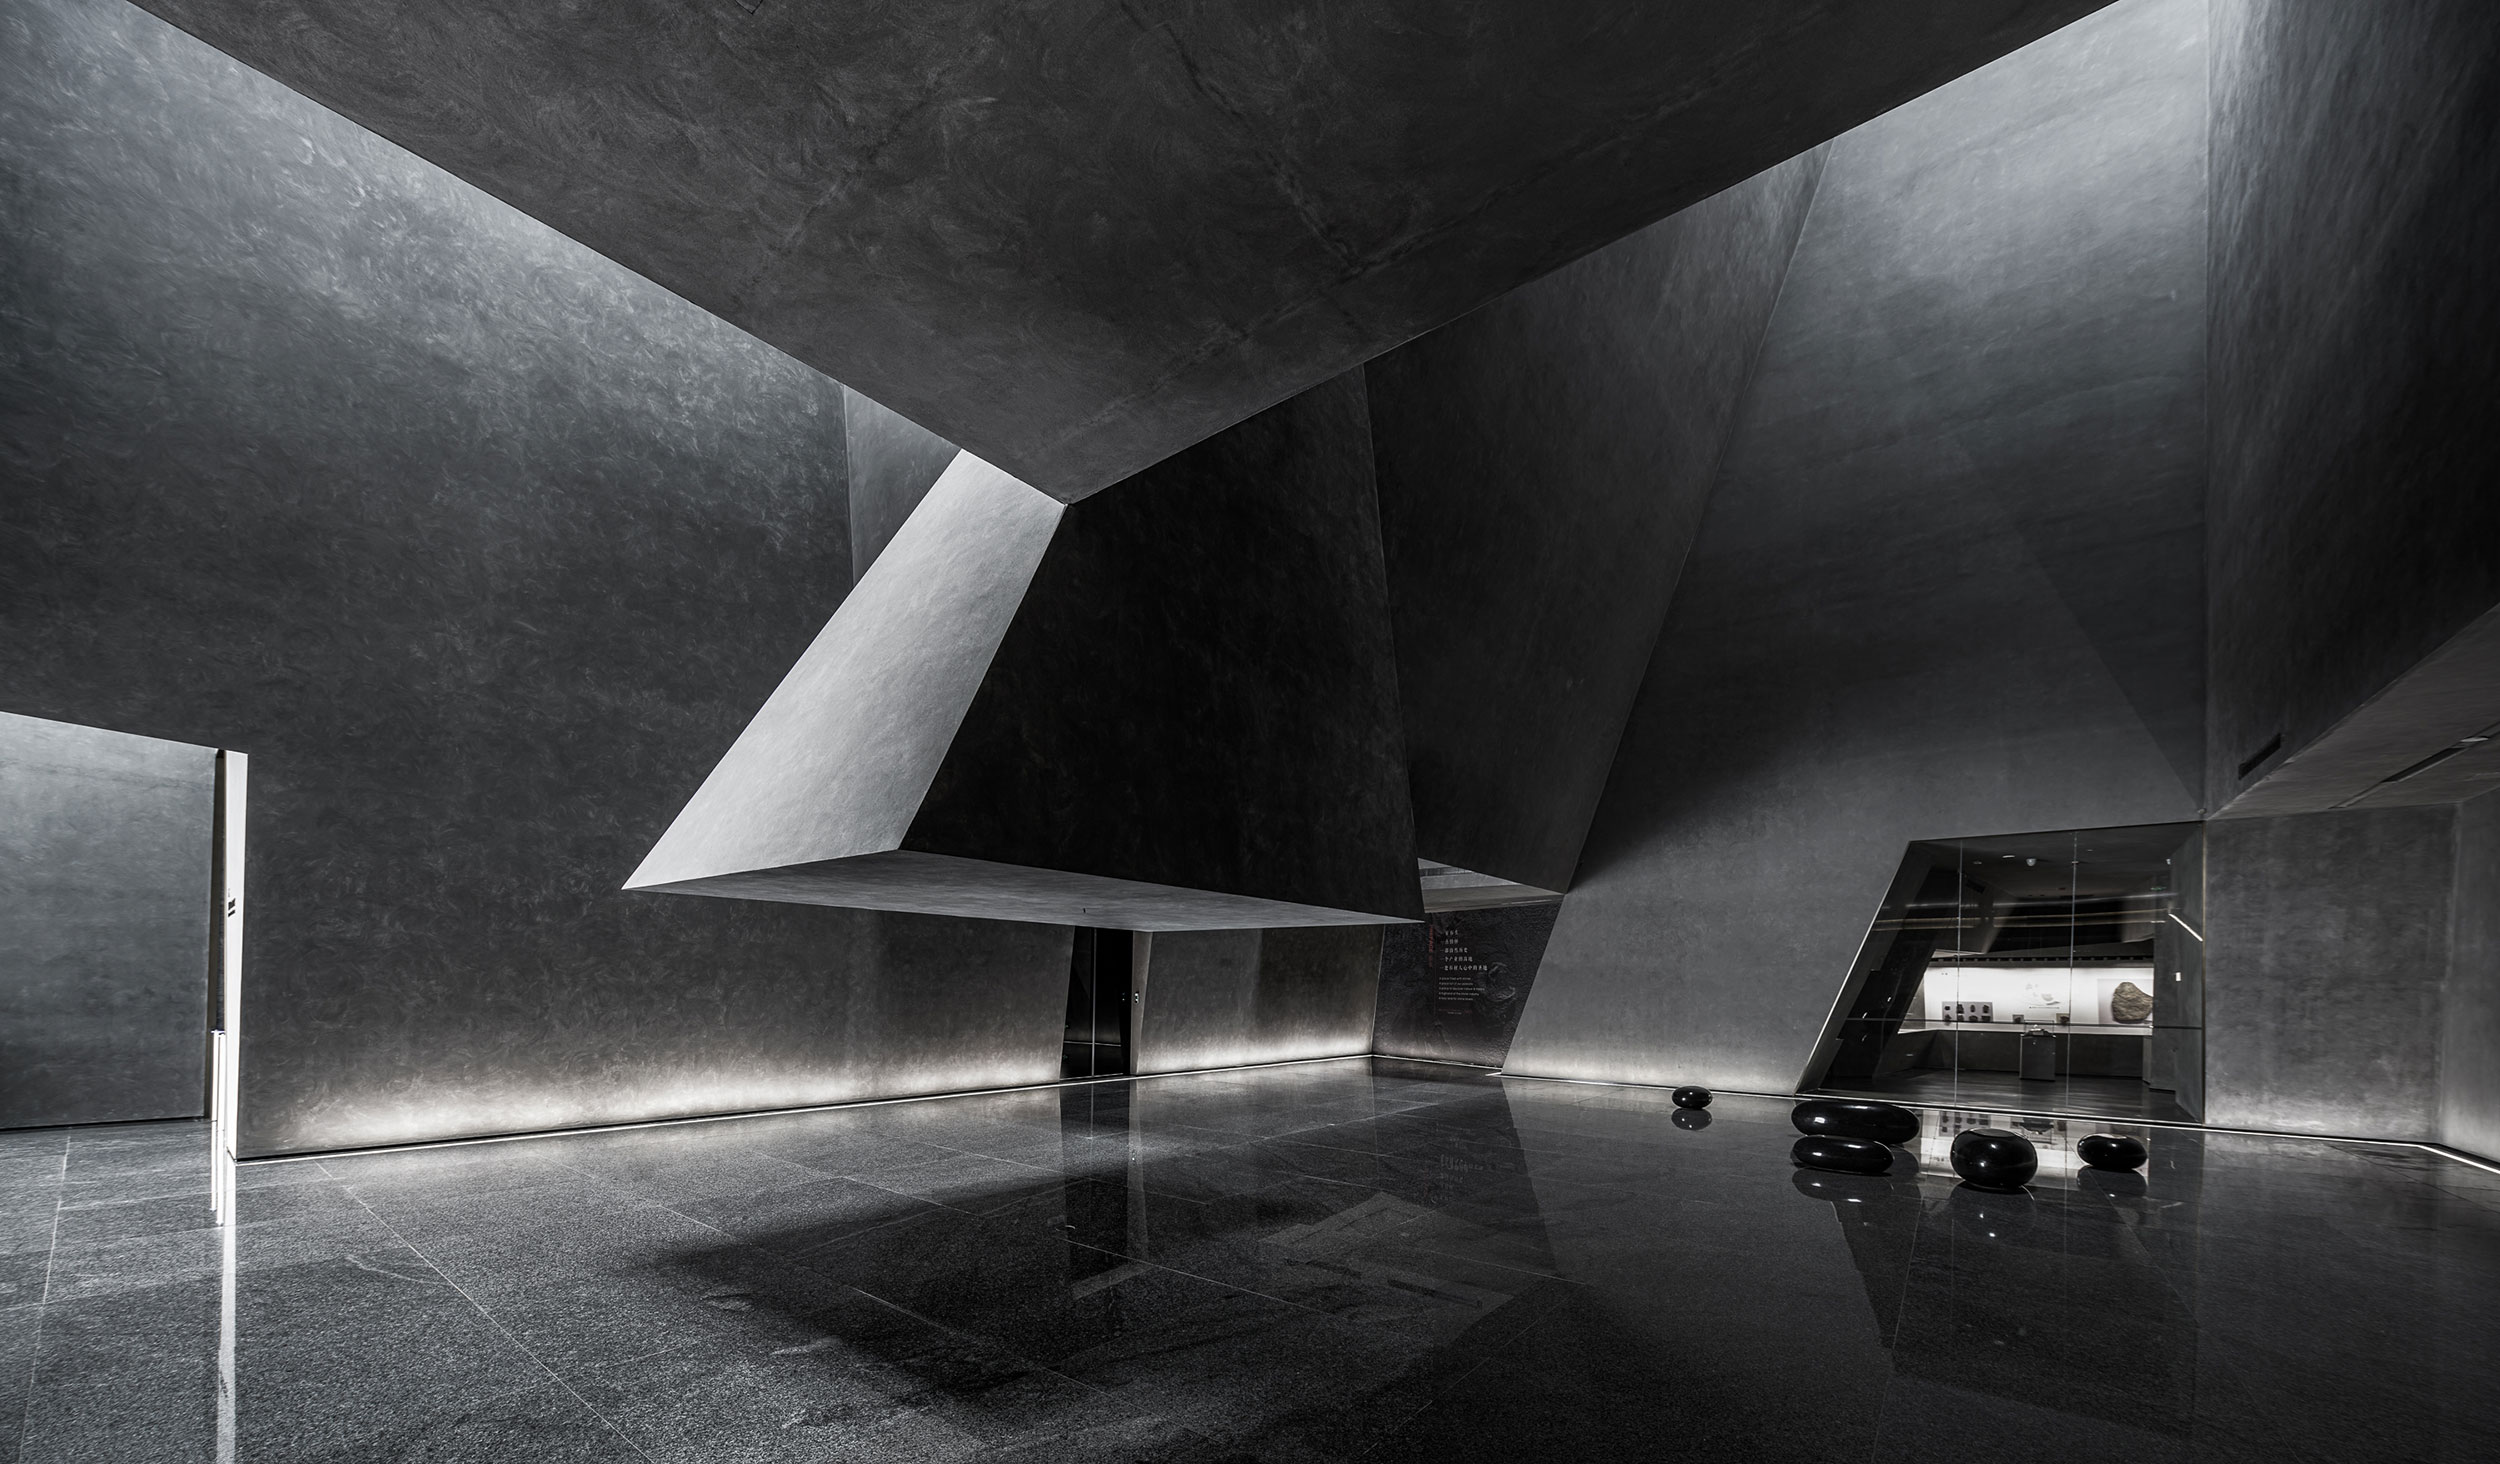 Yingliang Stone Natural History Museum. Architect: Atelier Alter Architects. Location: Xiamen, China. Photo: Atelier Alter Architects.